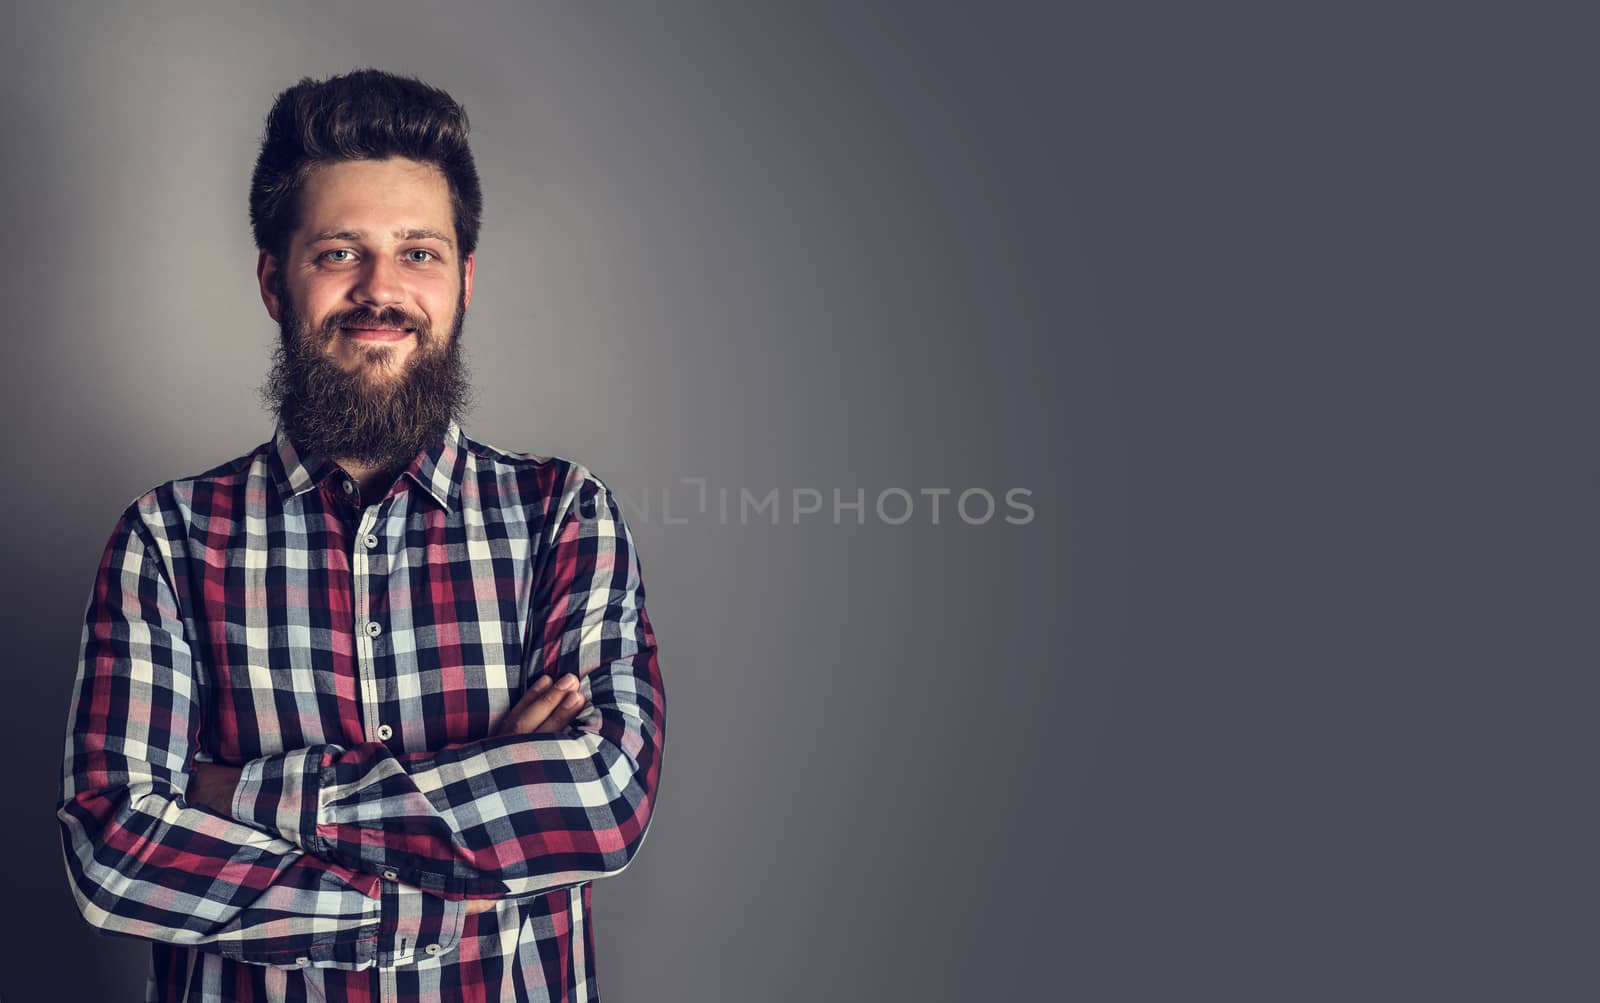 Smiling bearded man in checked shirt, portrait, studio shot on gray background